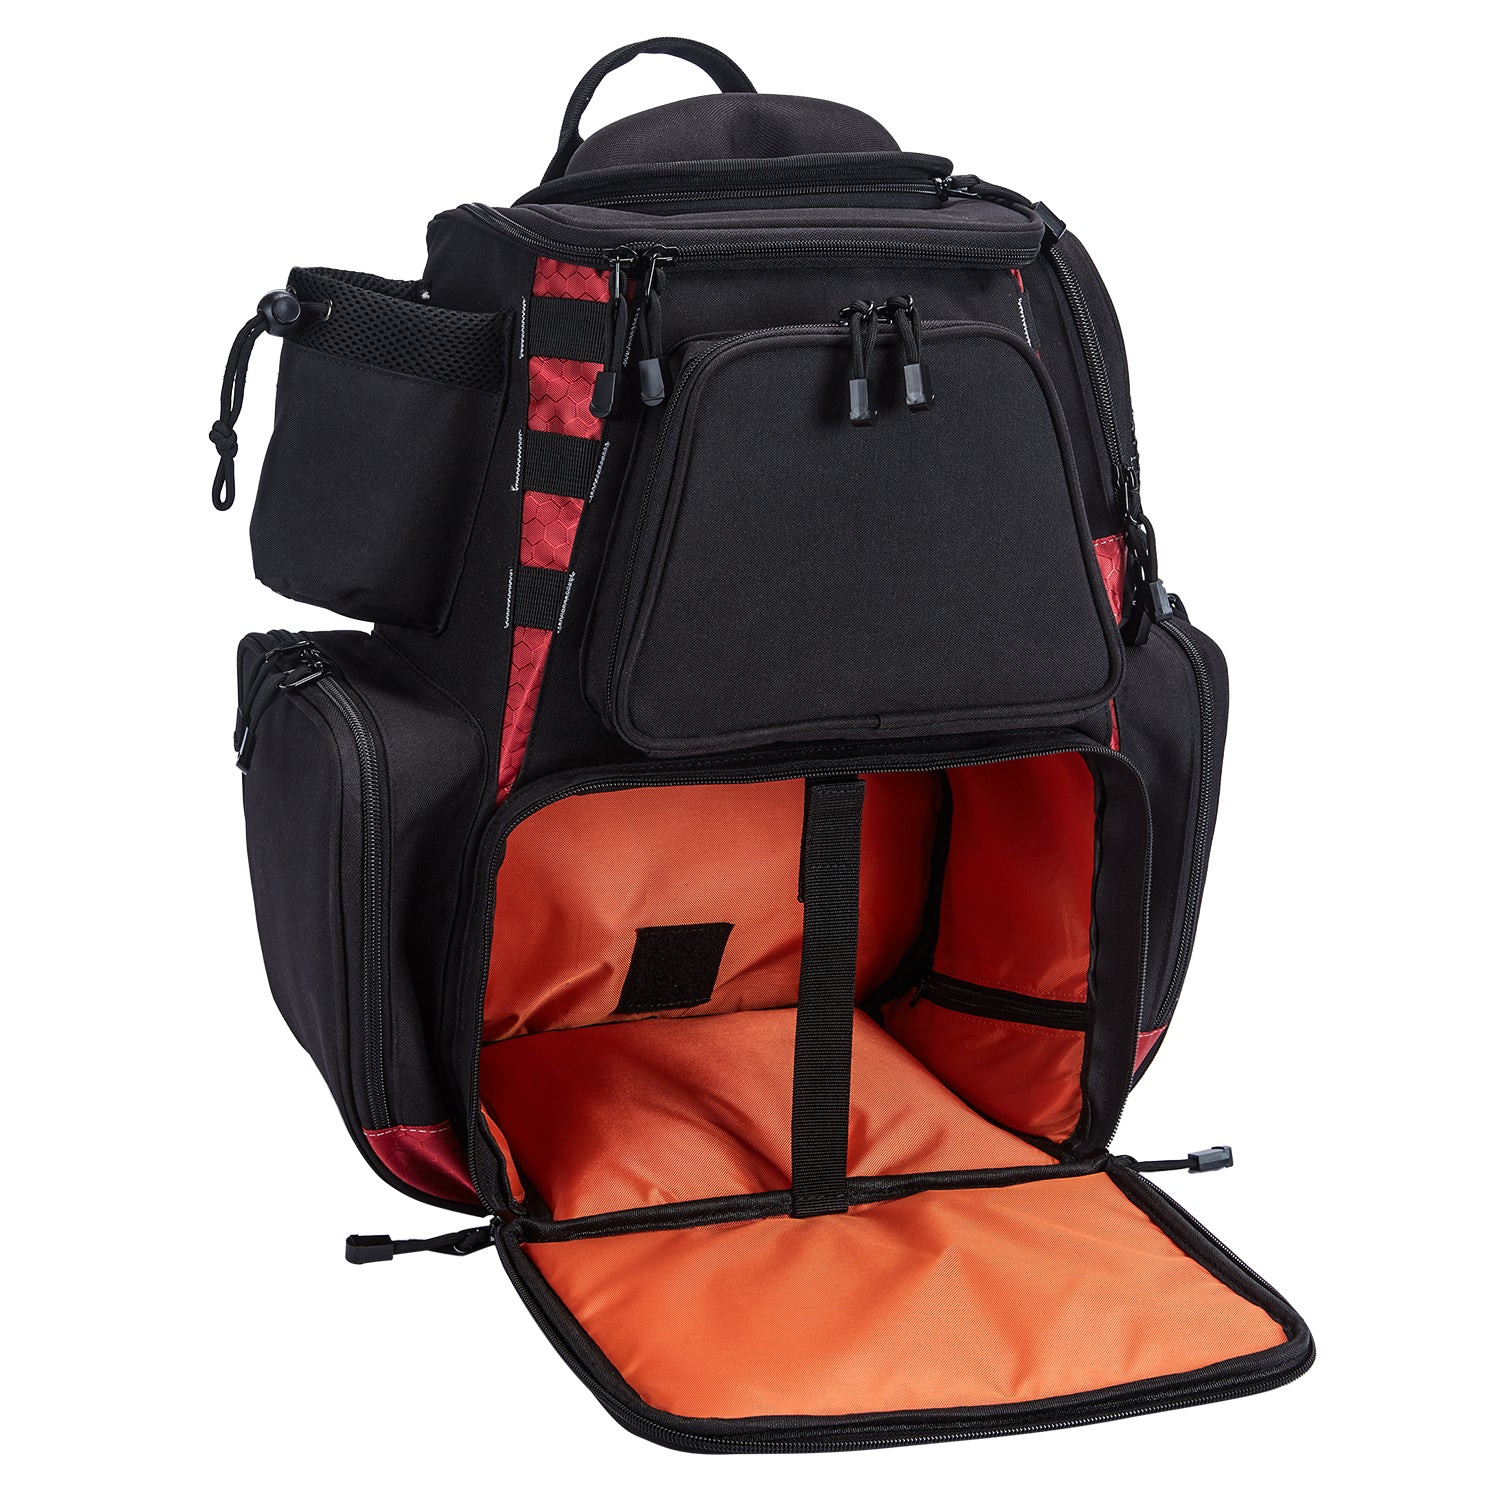 Fishing Tackle Backpack With Fishing Gear Bag